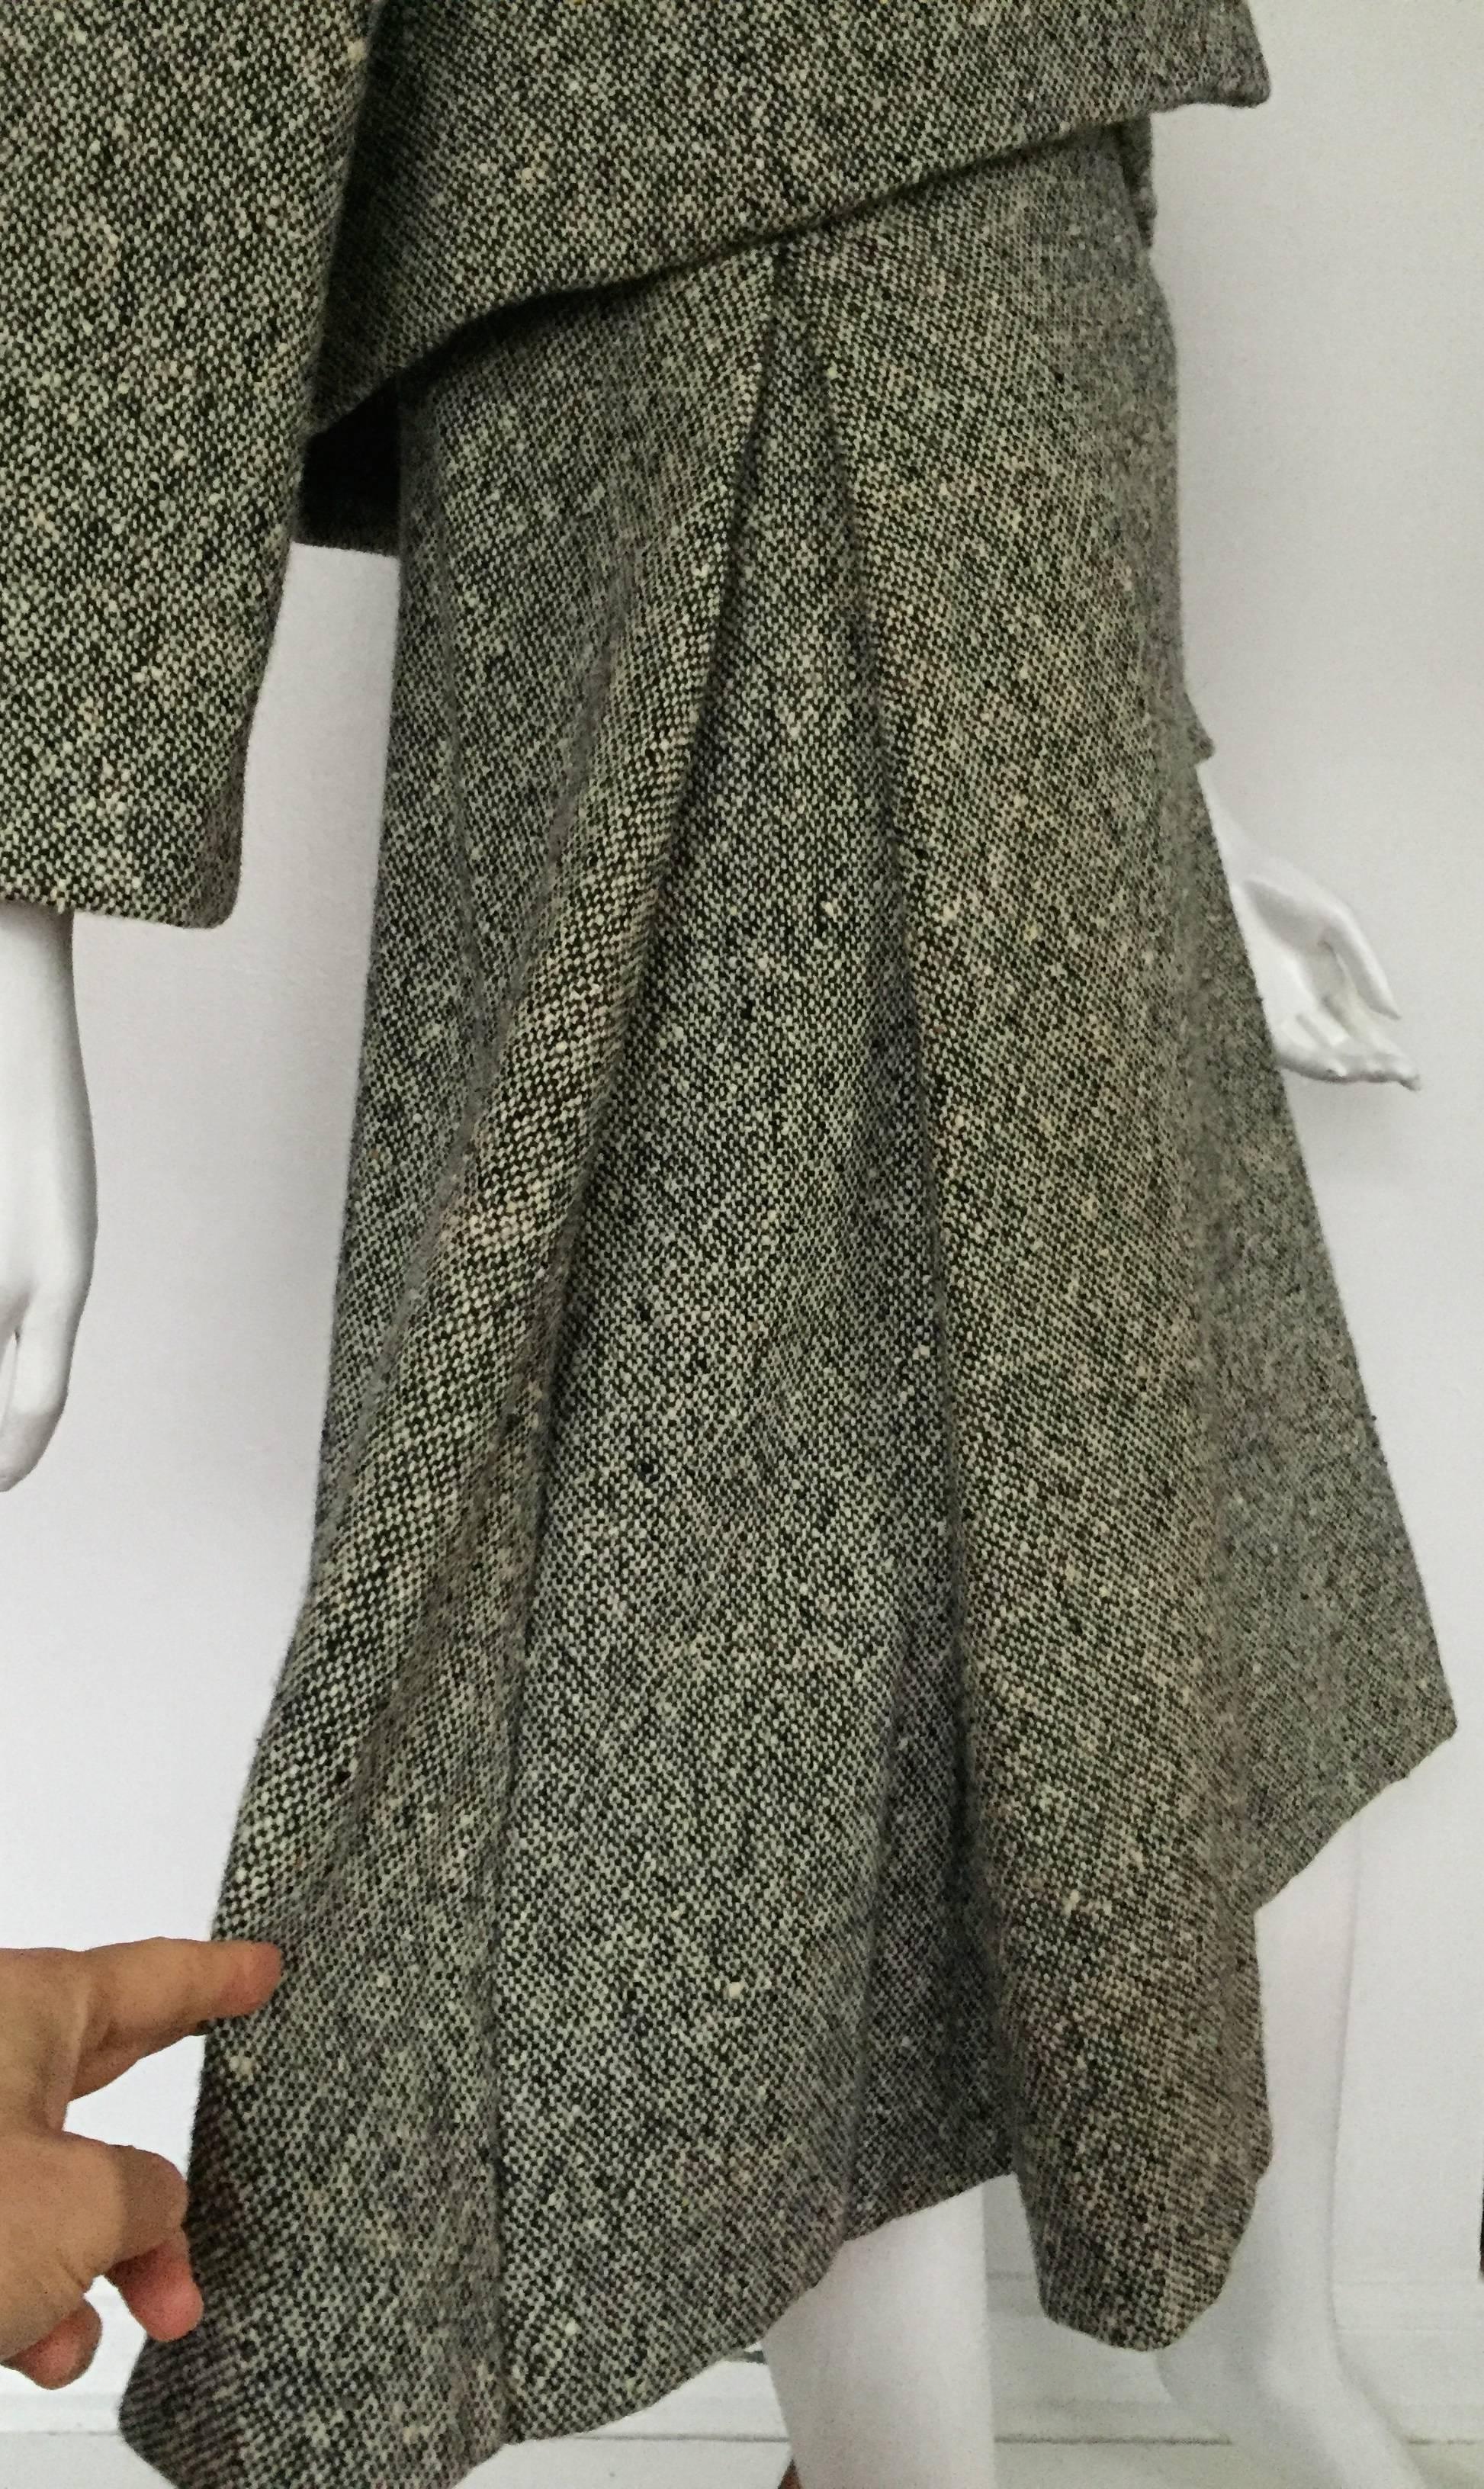 Women's Gustave Tassell 1965 wool dress with jacket size 12 / 14.  For Sale